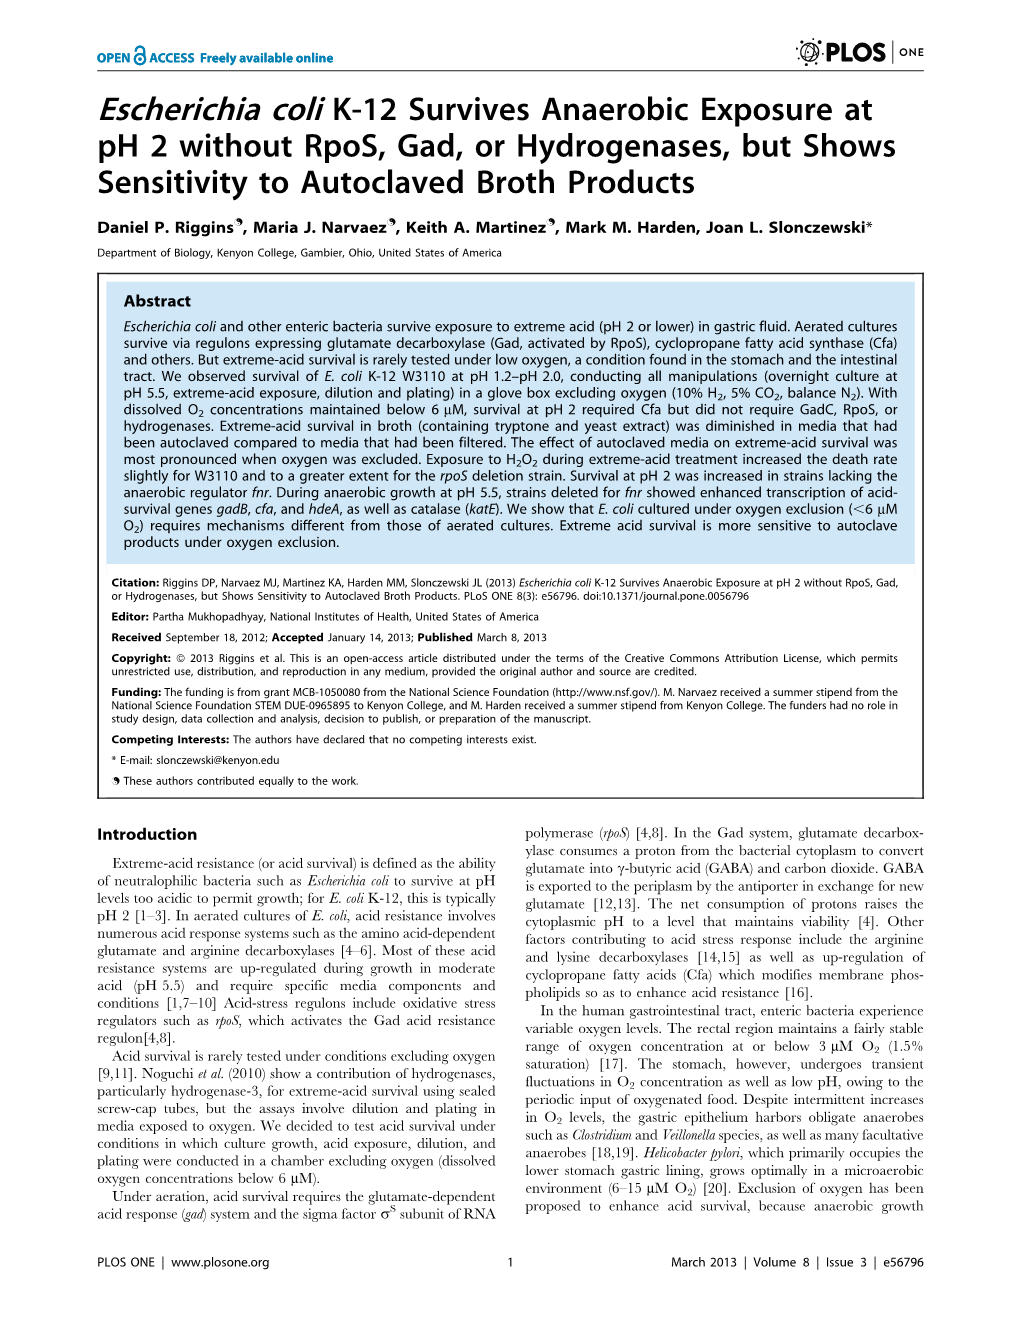 Escherichia Coli K-12 Survives Anaerobic Exposure at Ph 2 Without Rpos, Gad, Or Hydrogenases, but Shows Sensitivity to Autoclaved Broth Products